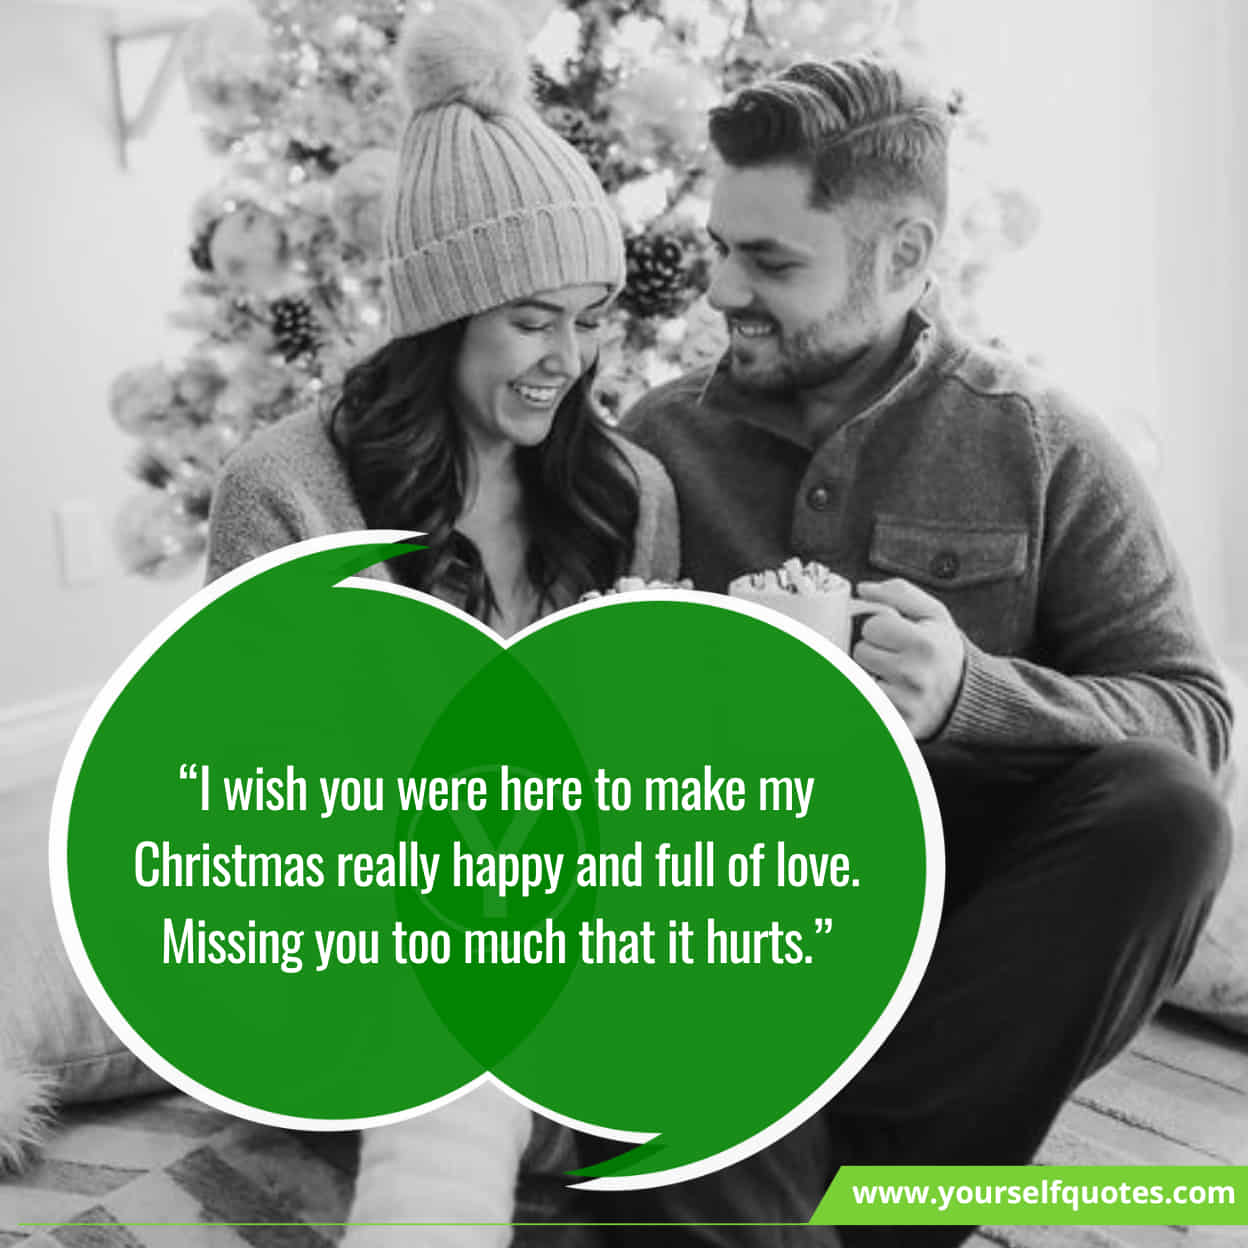 Merry Christmas Wishes for Long Distance Boyfriend